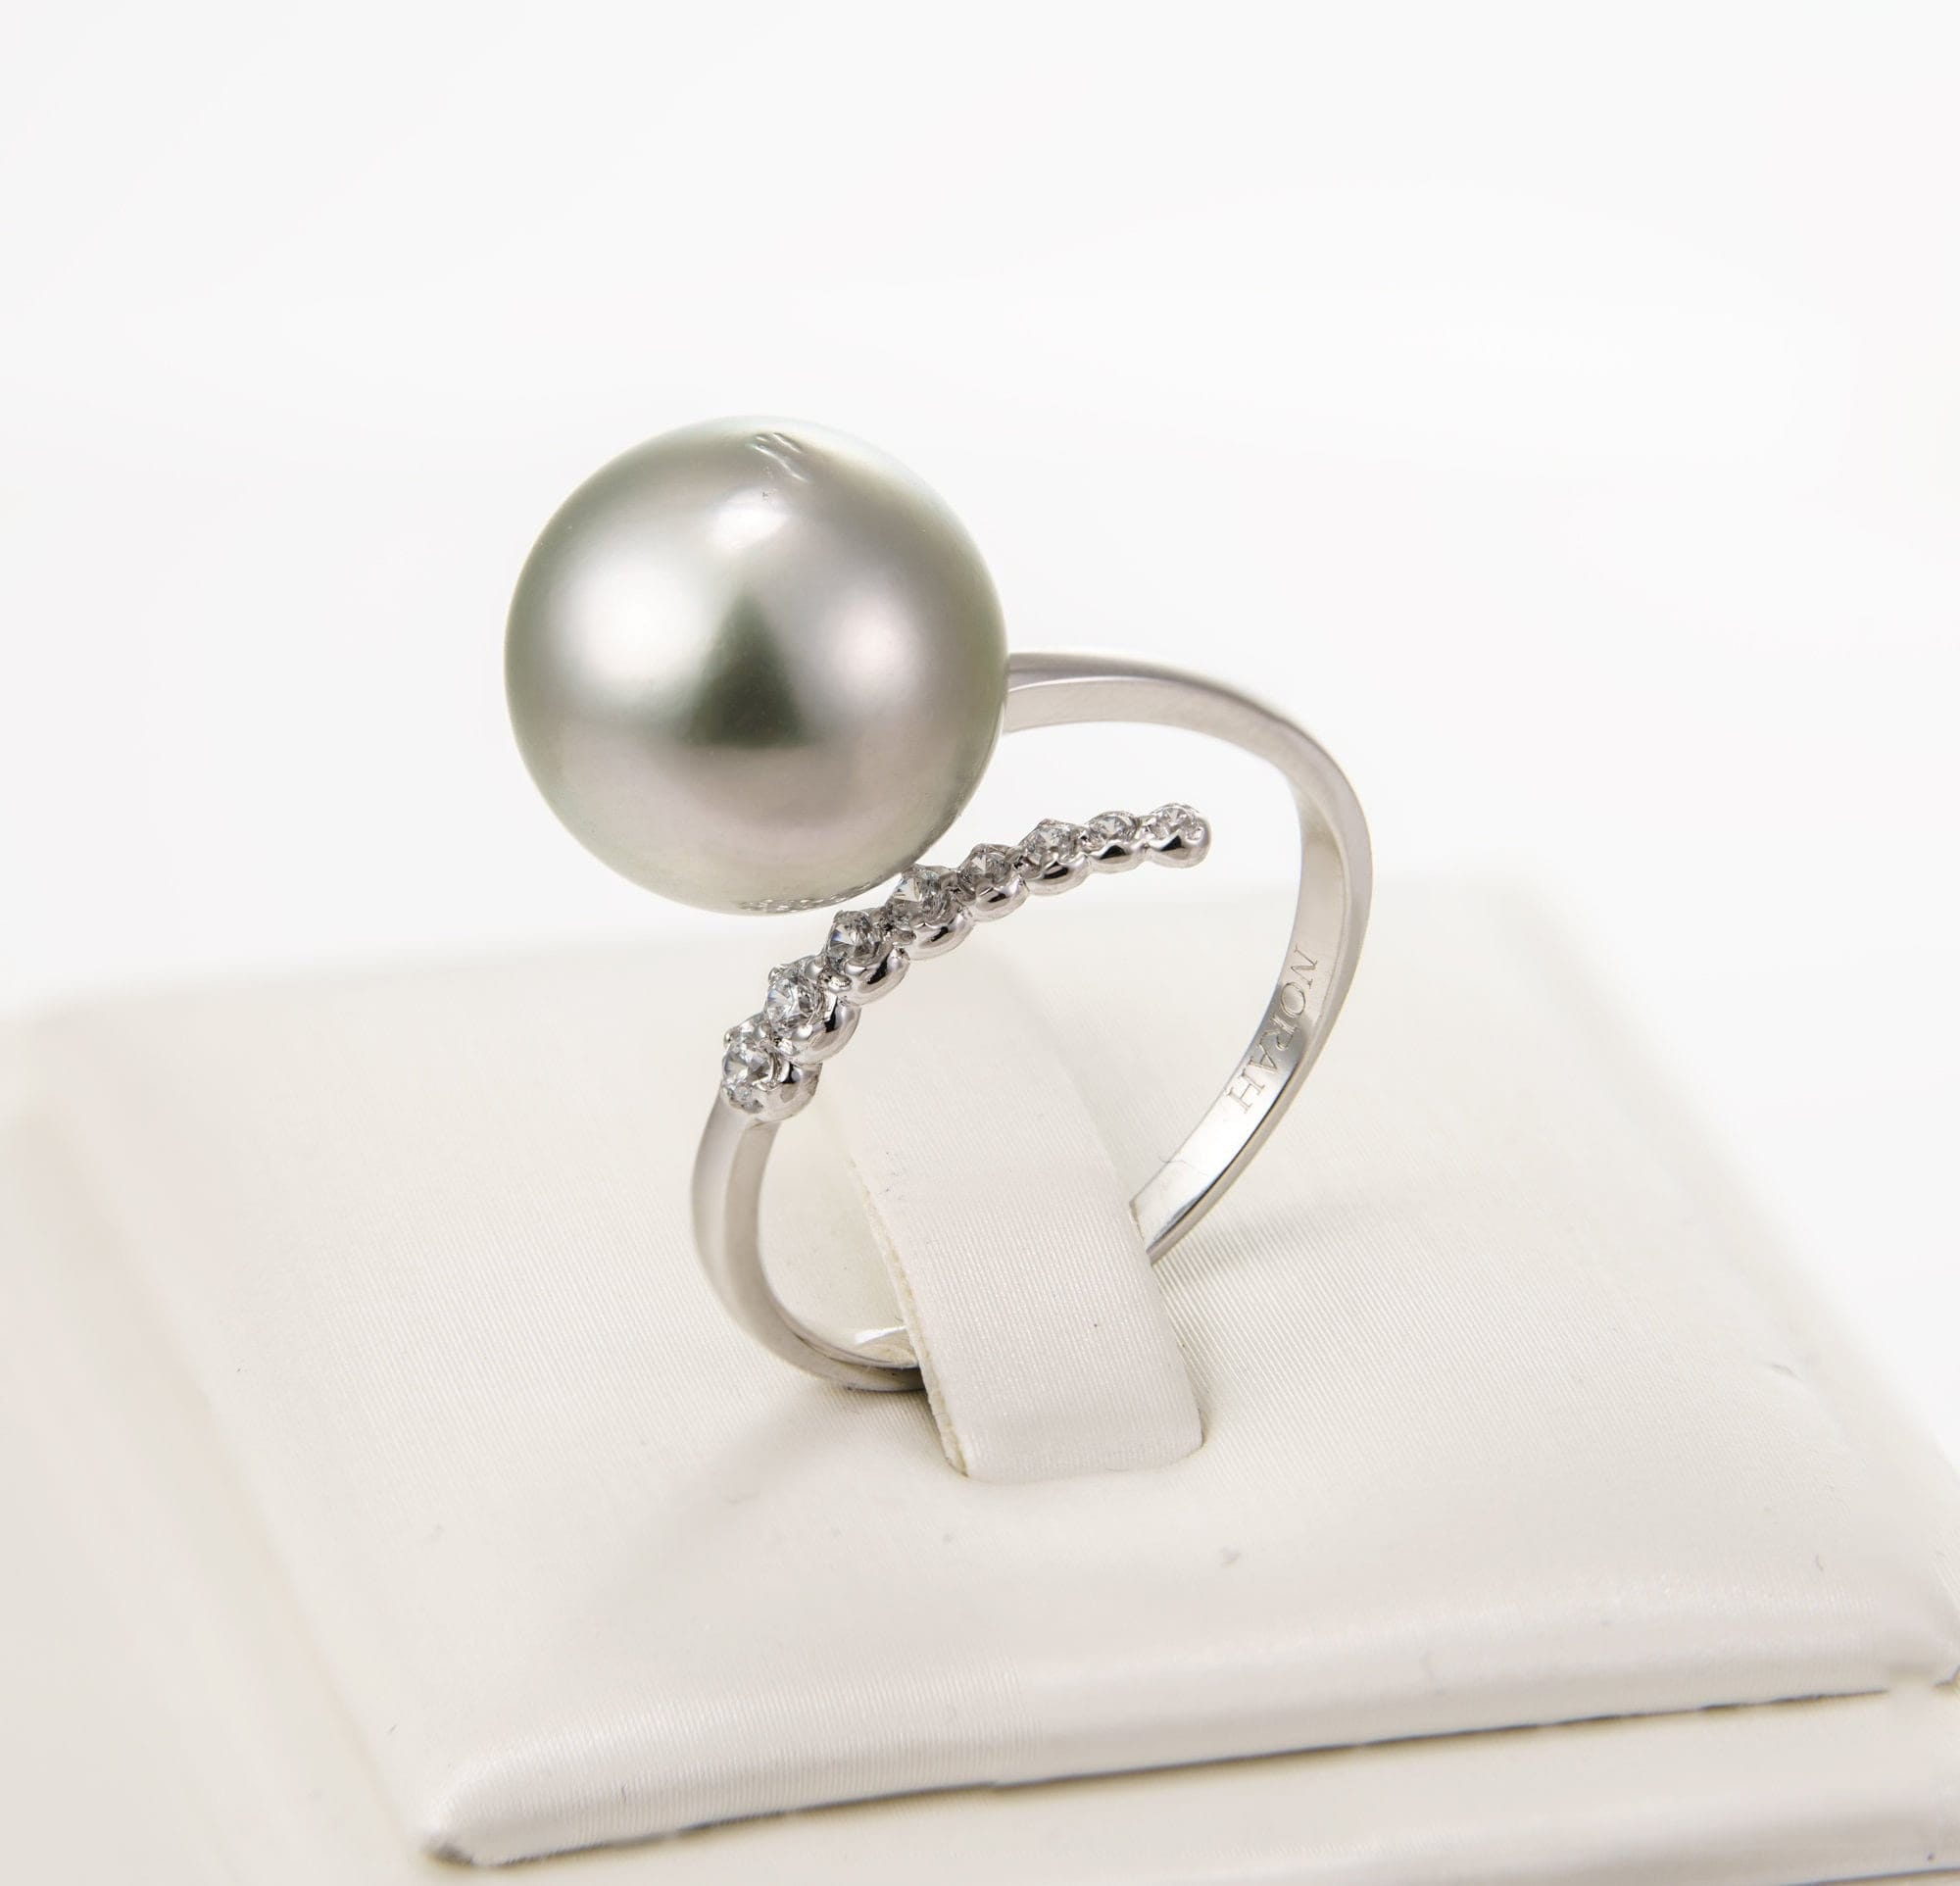 12mm tahitian pearl ring, size 9.5 us, 925 sterling silver with cubic zirconia